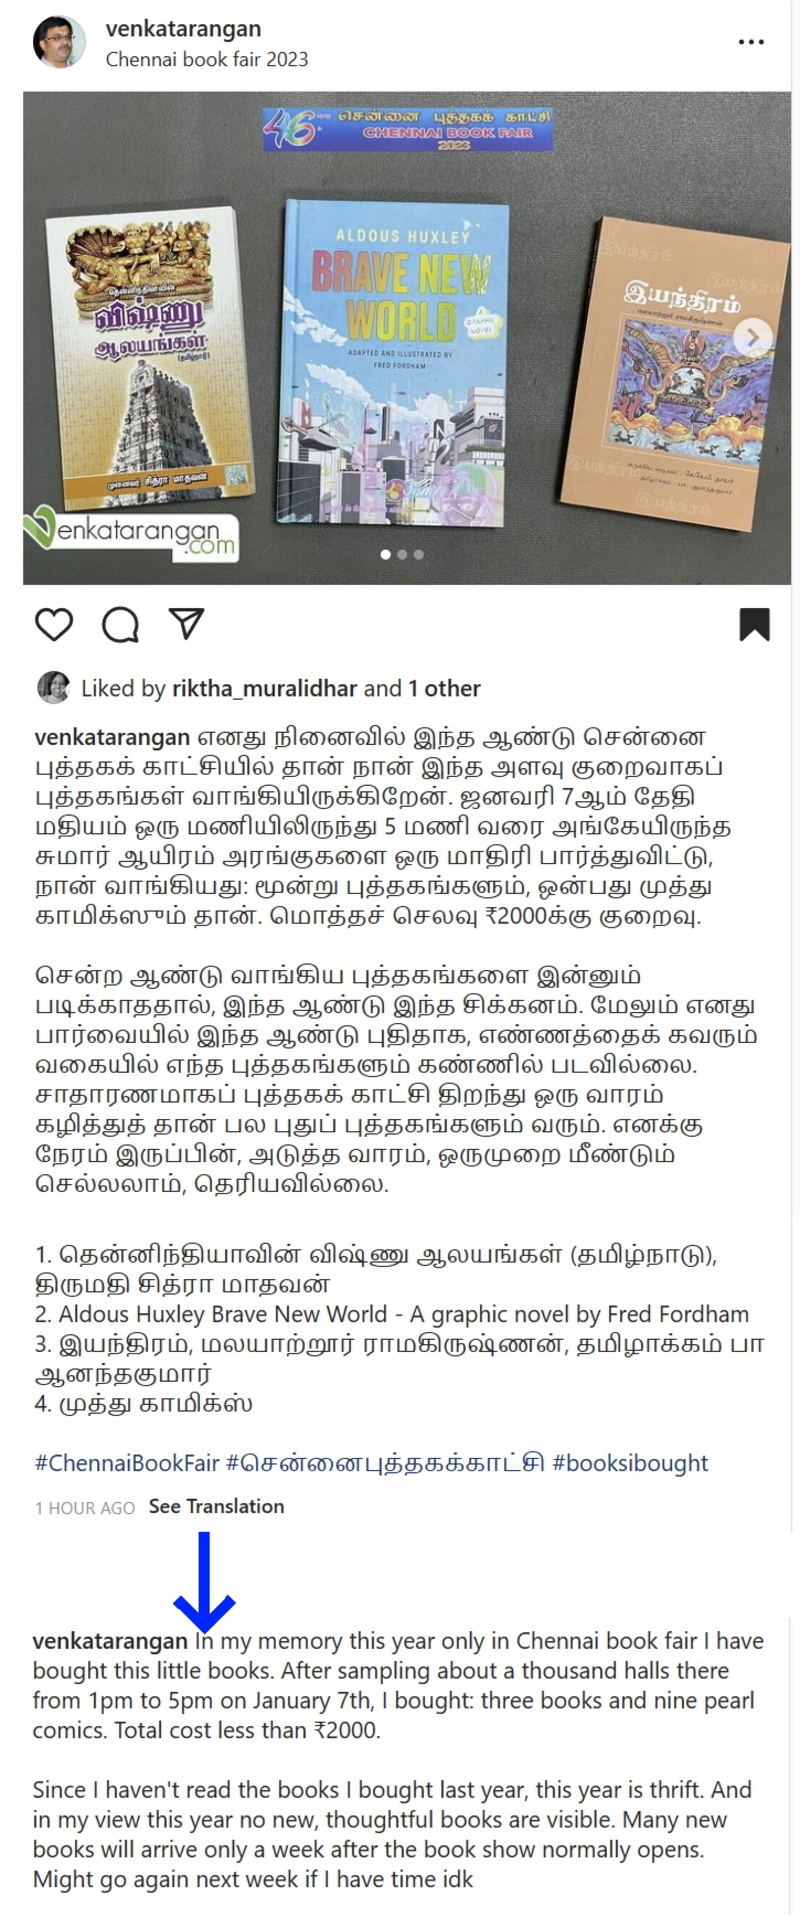 Tamil to English automatic translation in Instagram